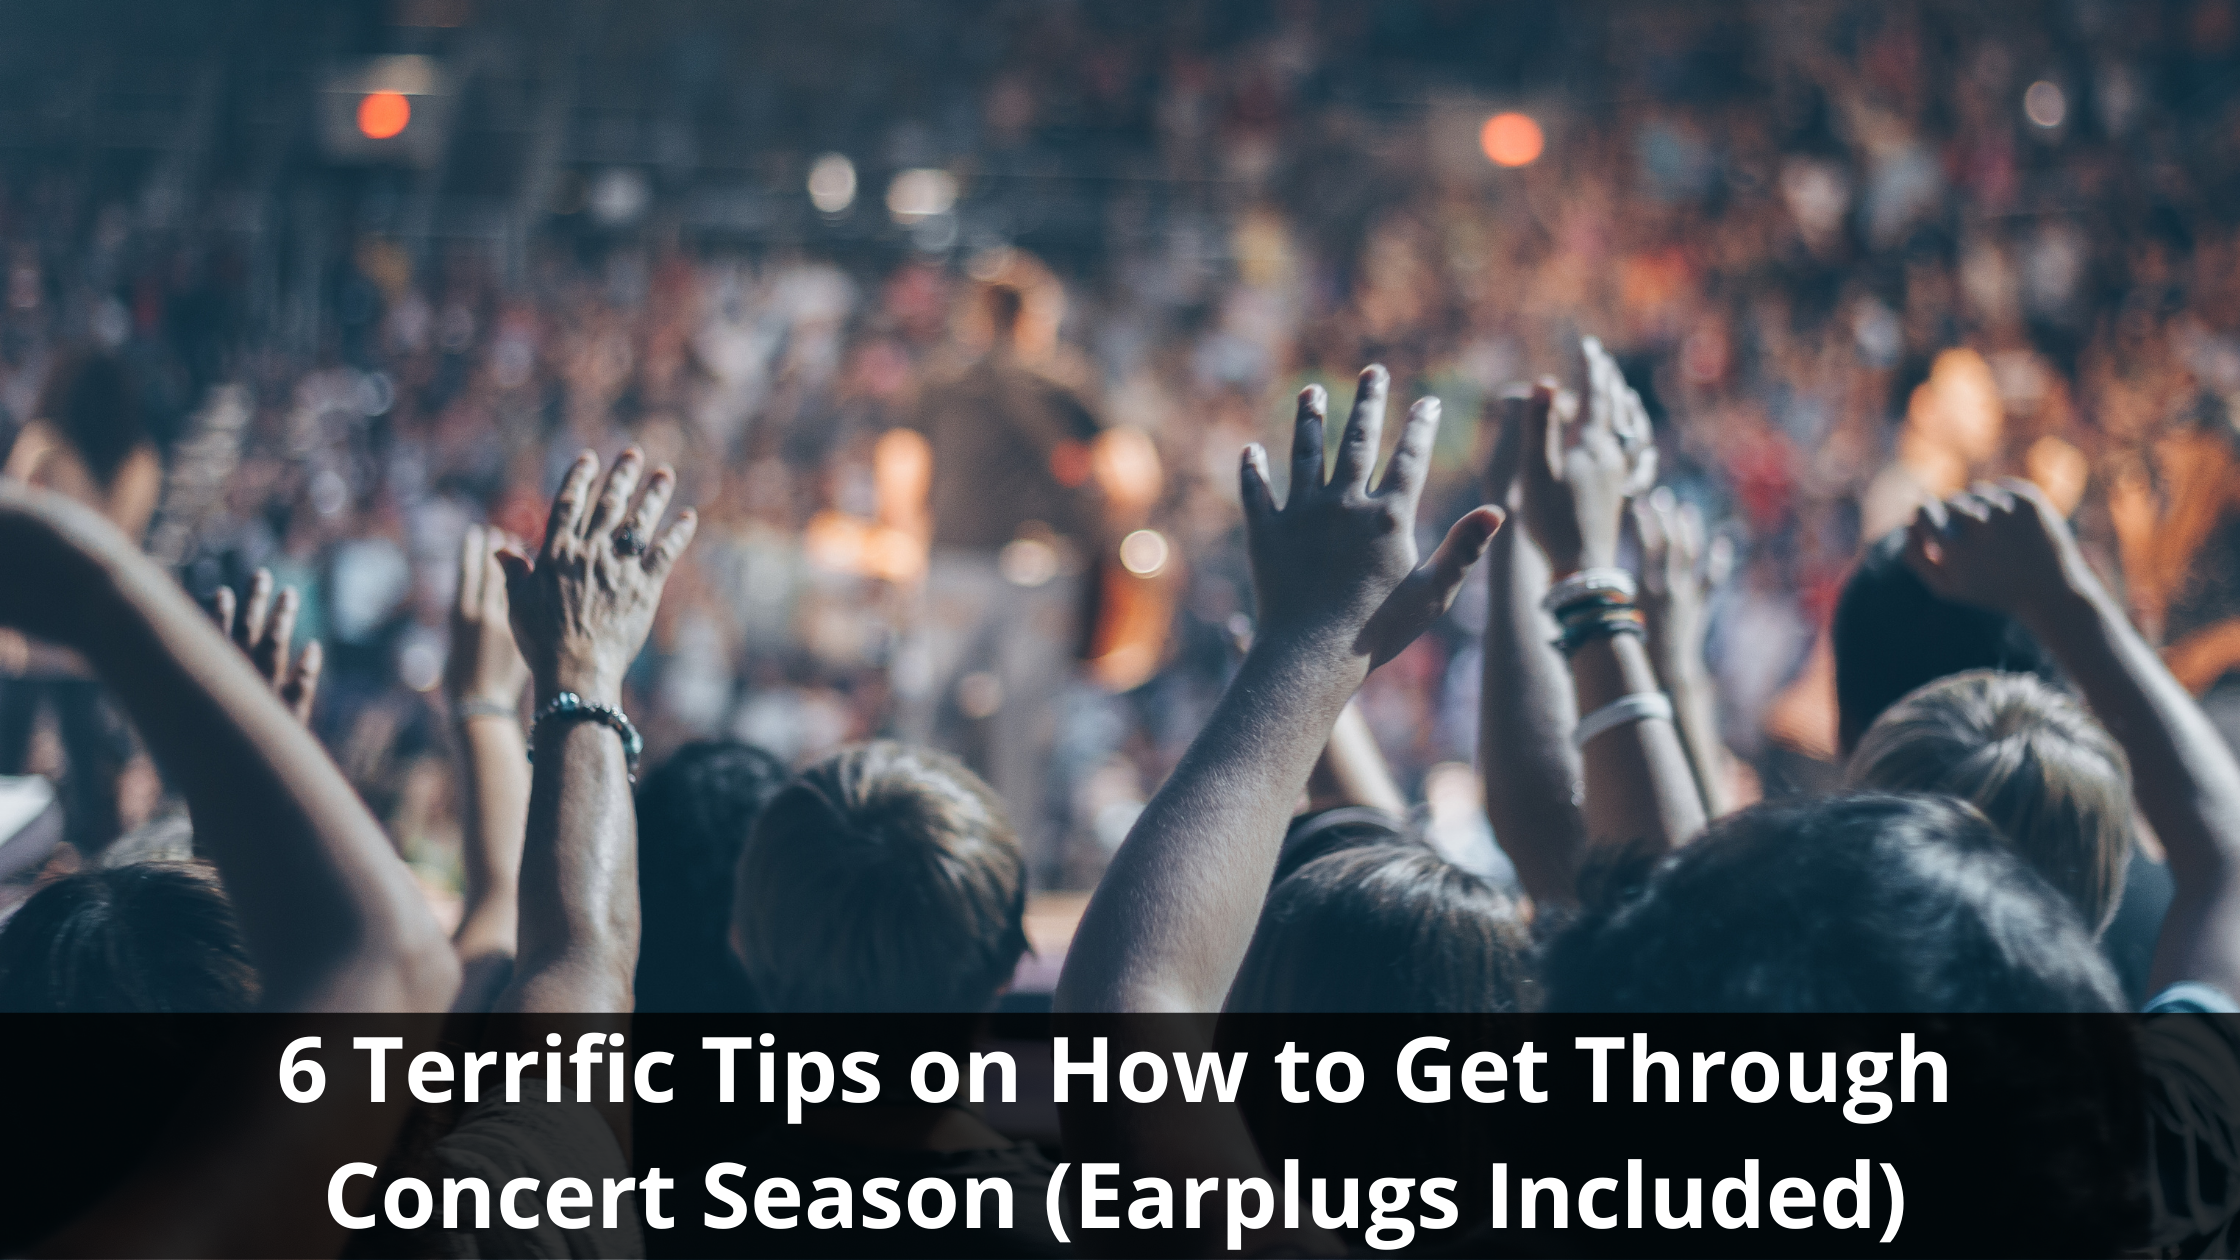 6 Terrific Tips on How to Get Through Concert Season (Earplugs Included)